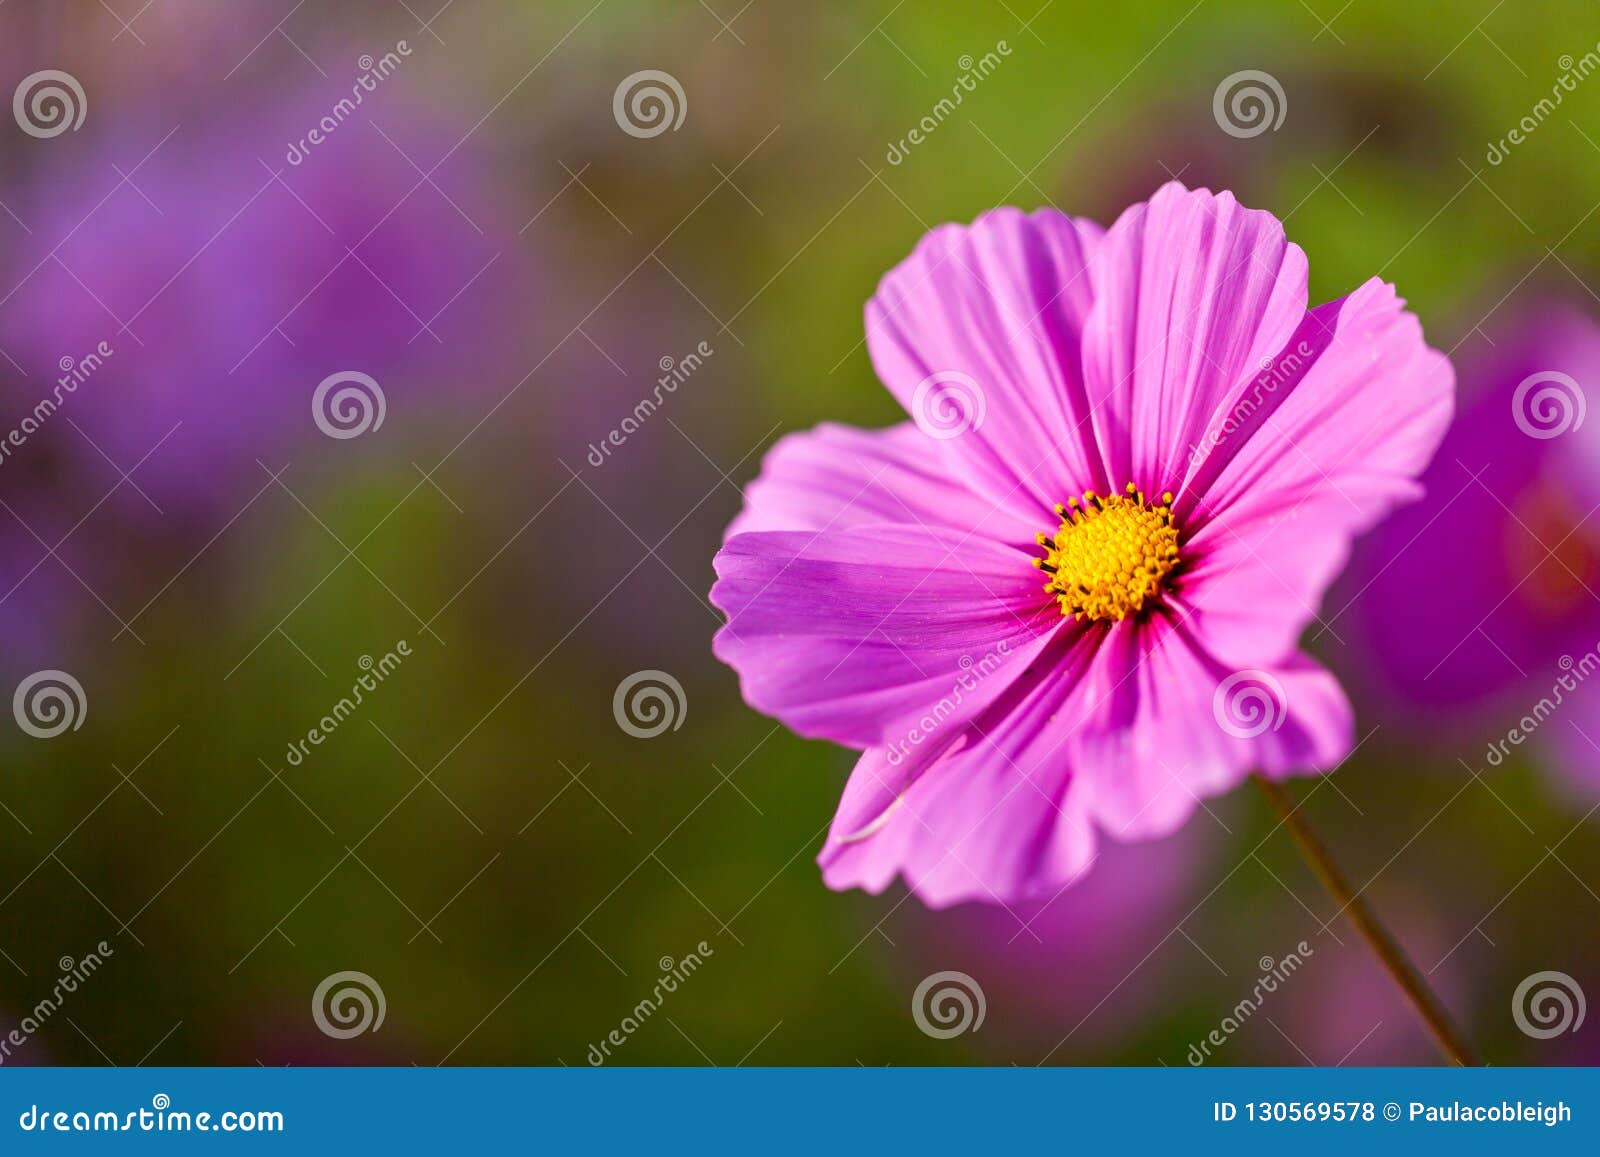 a pretty pink cosmos flower with shallow depth of field